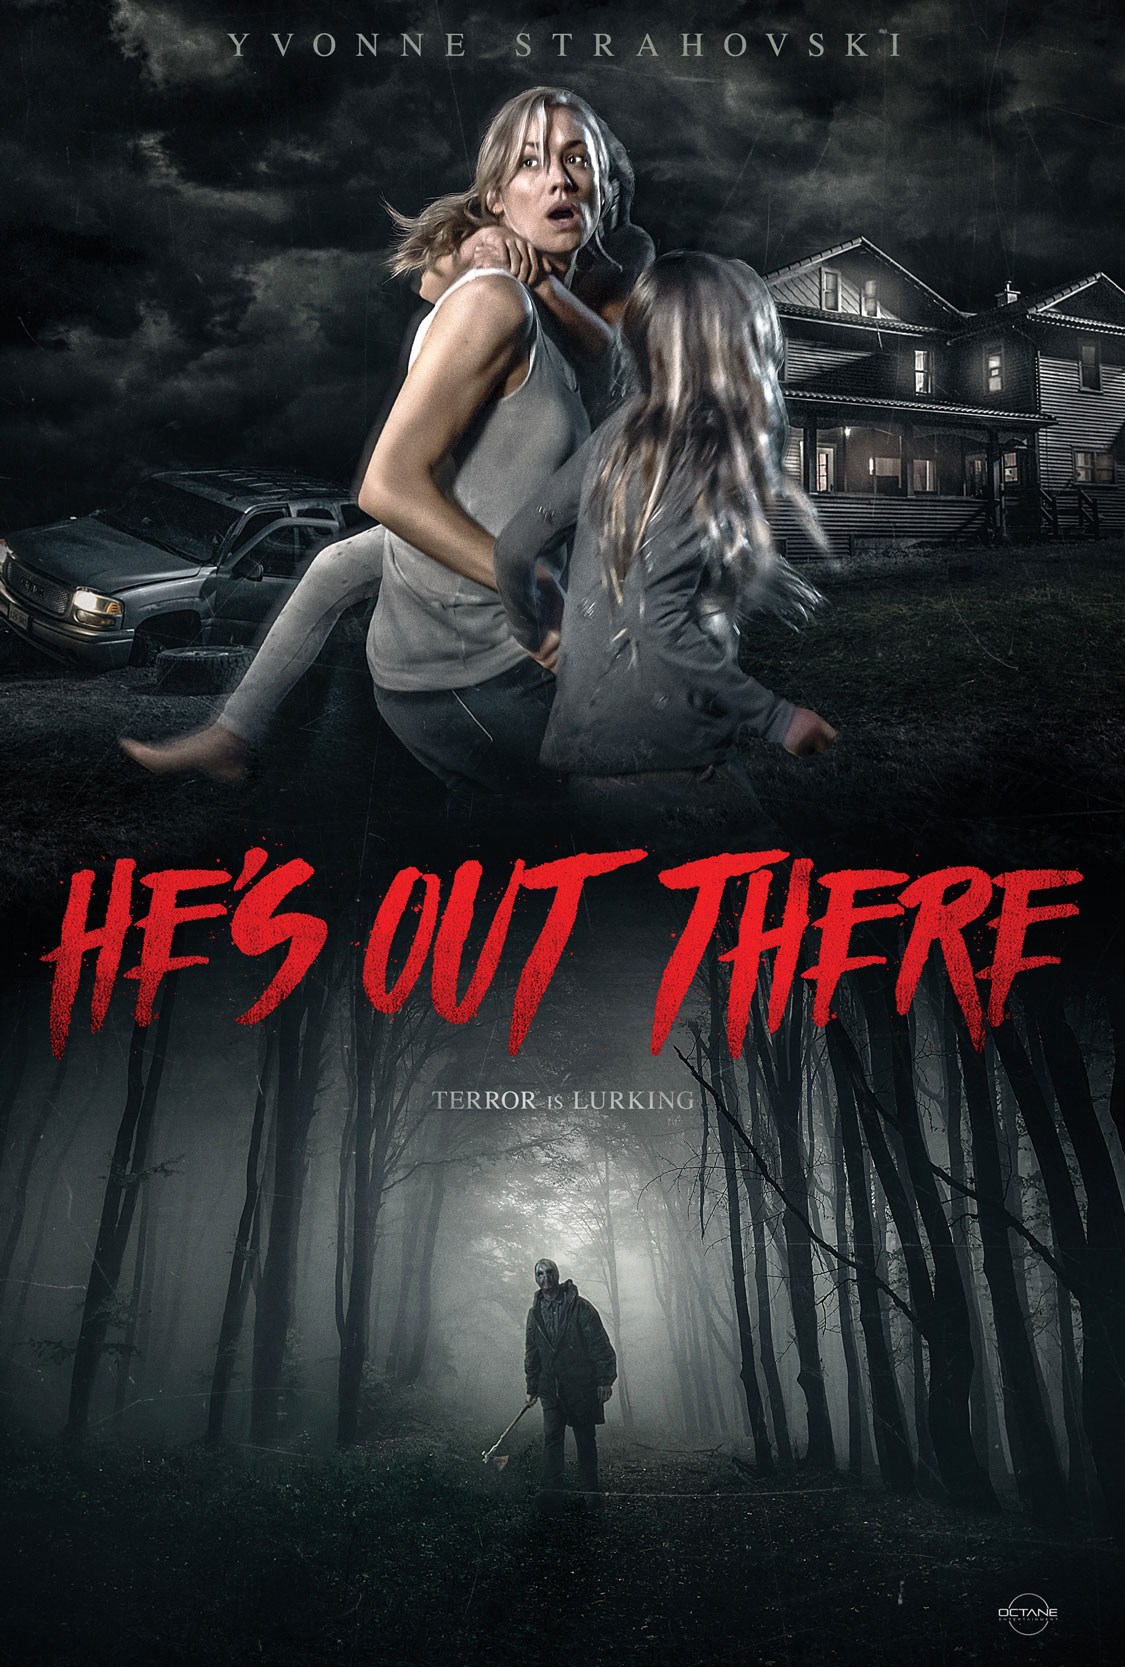 Hes-Out-There-movie-poster.jpg